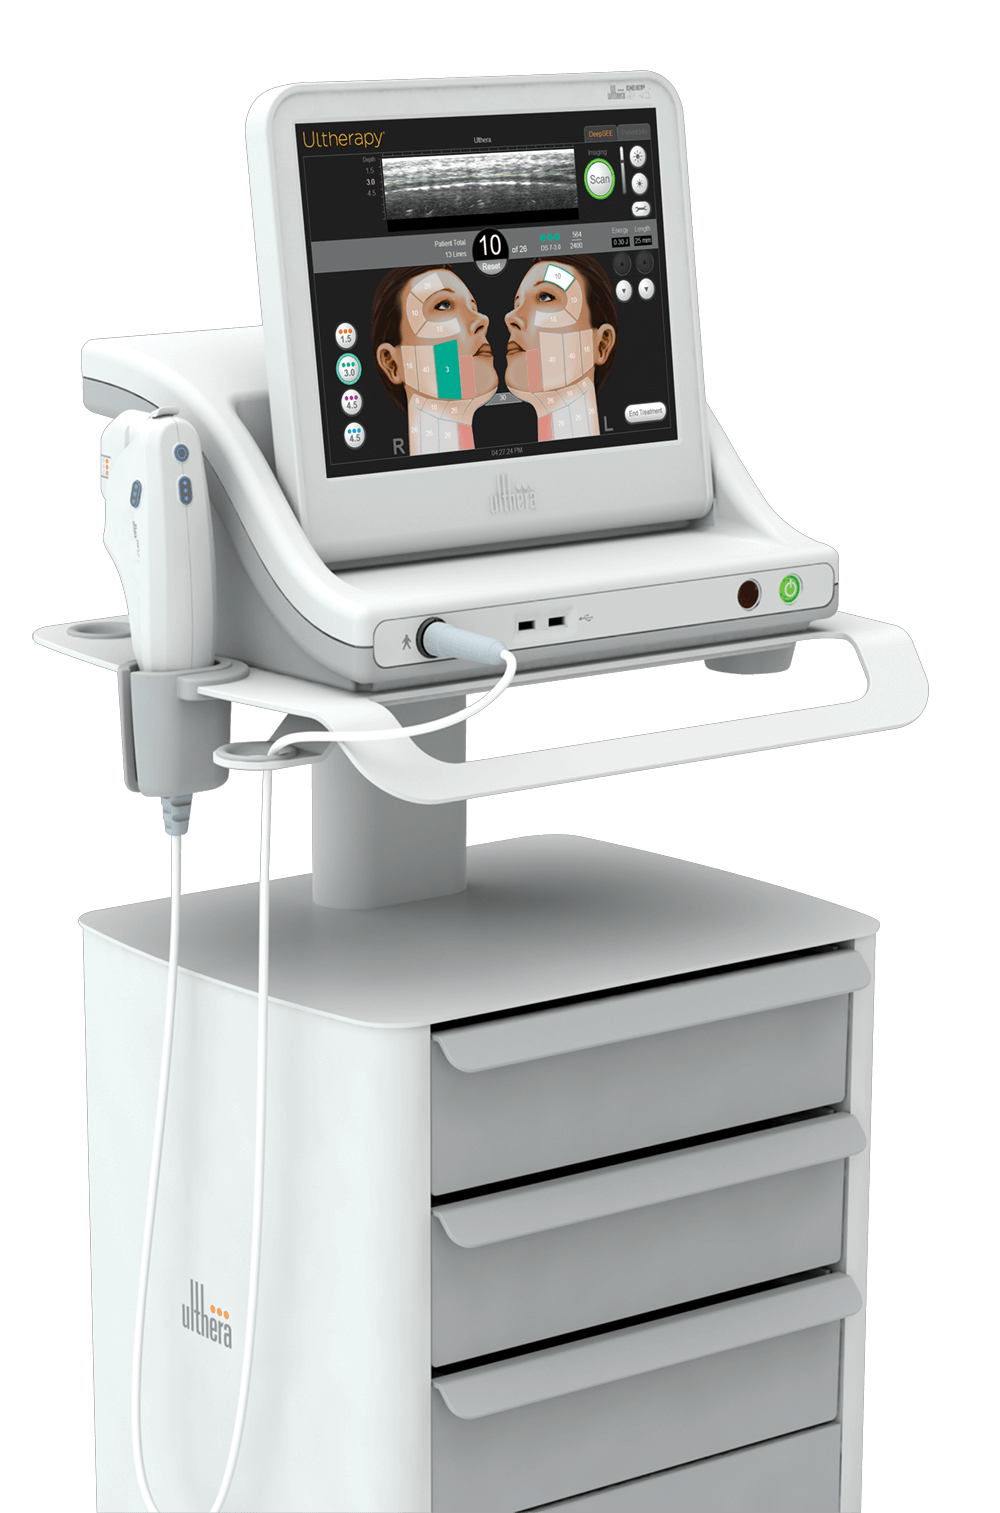 Ultherapy cart for portable non-invasive skin tightening treatment